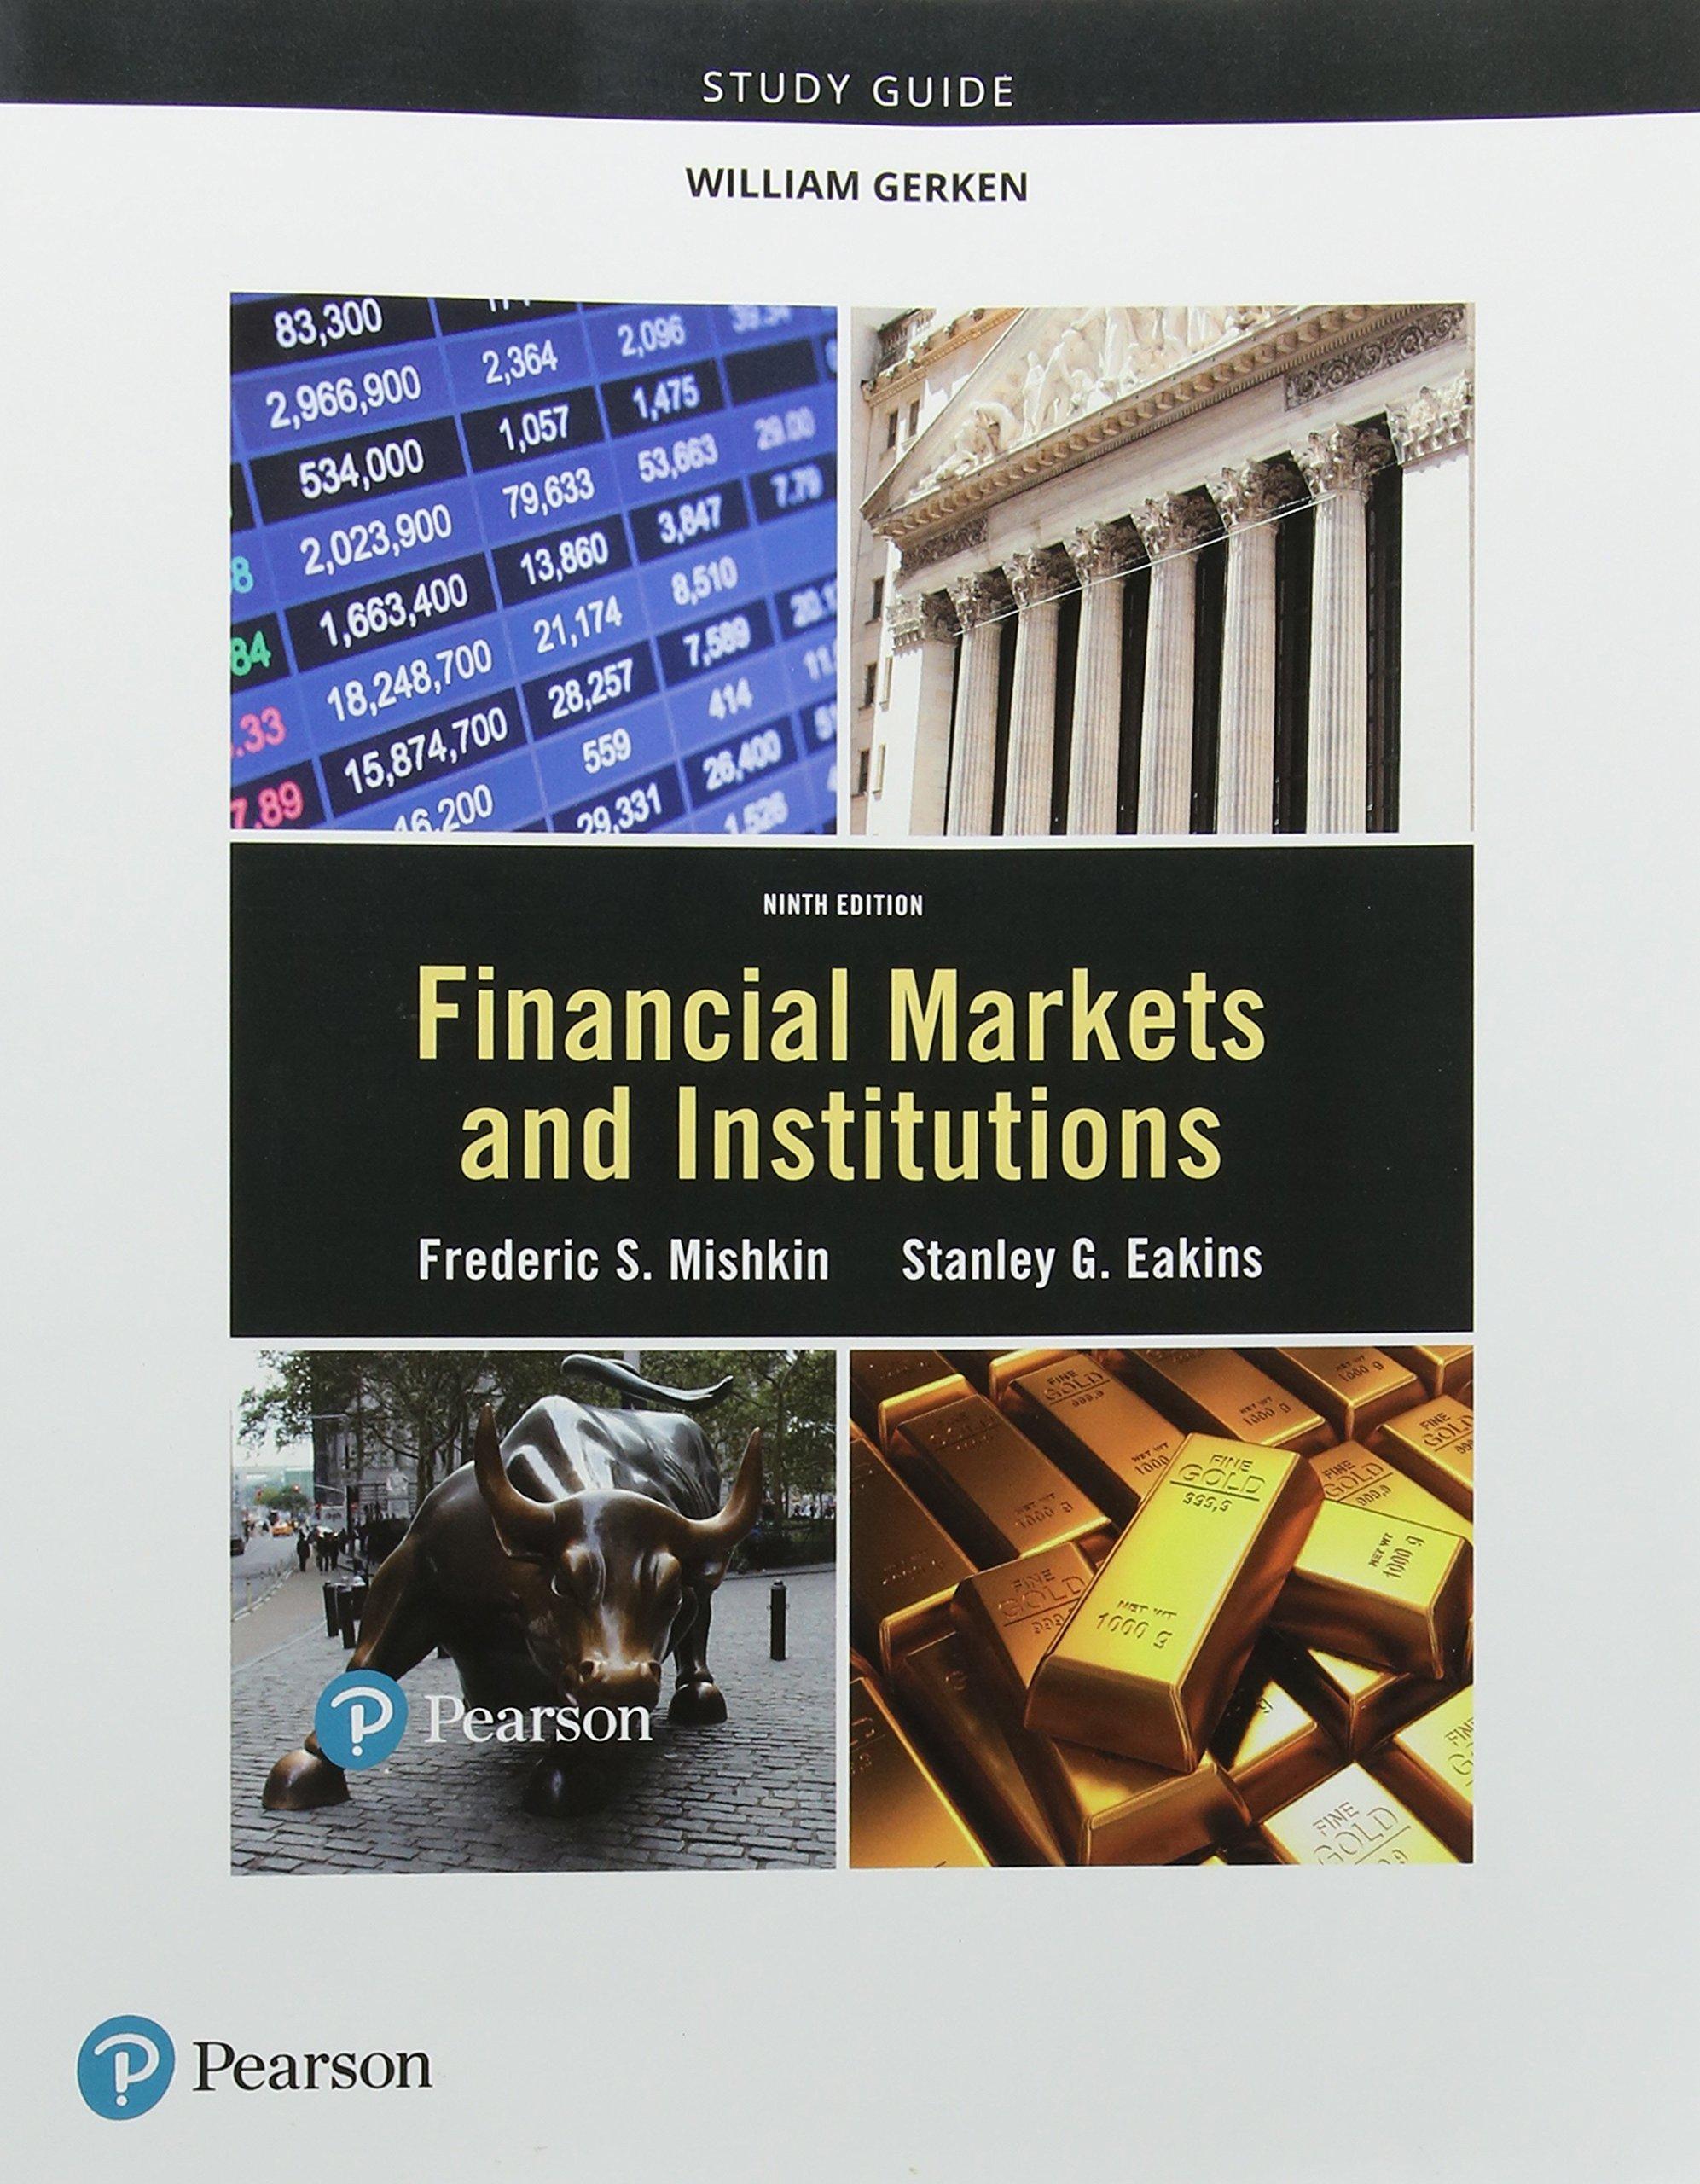 study guide for financial markets and institutions 9th edition frederic mishkin, stanley eakins 0134520408,